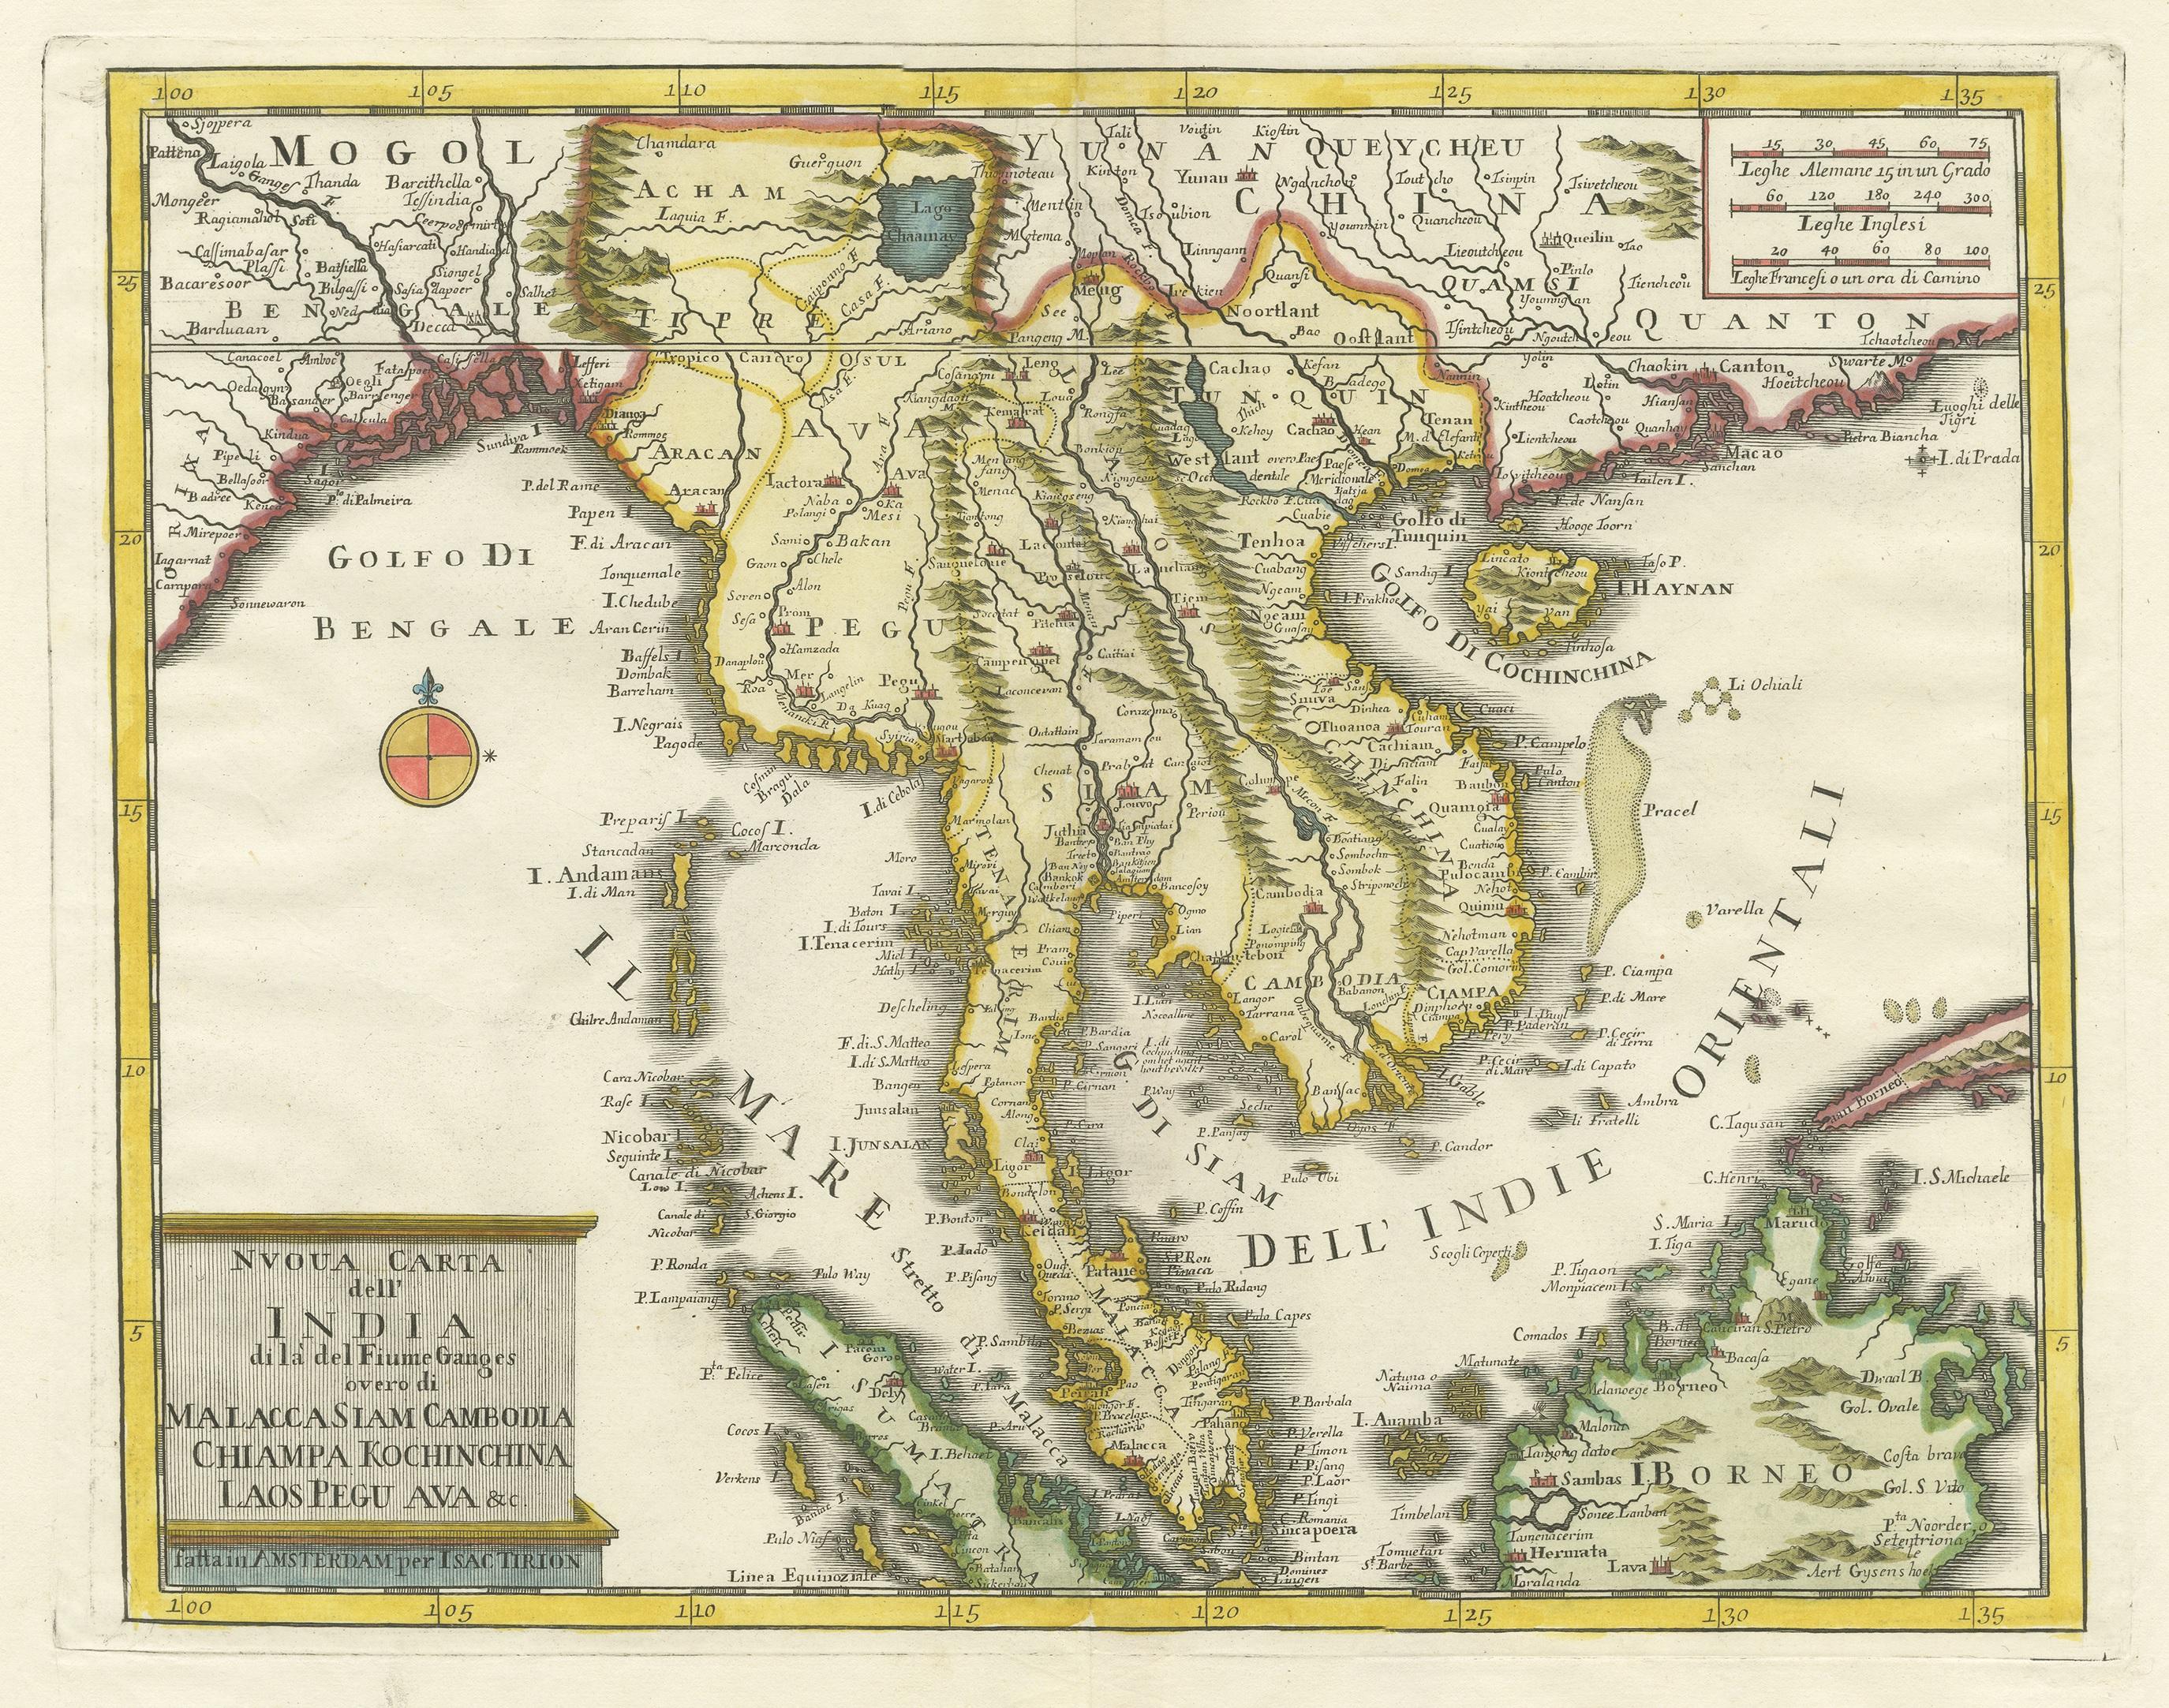 Antique map titled 'Nuova Carta dell' India (..)'. Decorative map of the region centered on the Malay Peninsula and extending from the Straits of Singapore, Malacca and Borneo in the South to China in the east and the Bay of Bengal in the south.